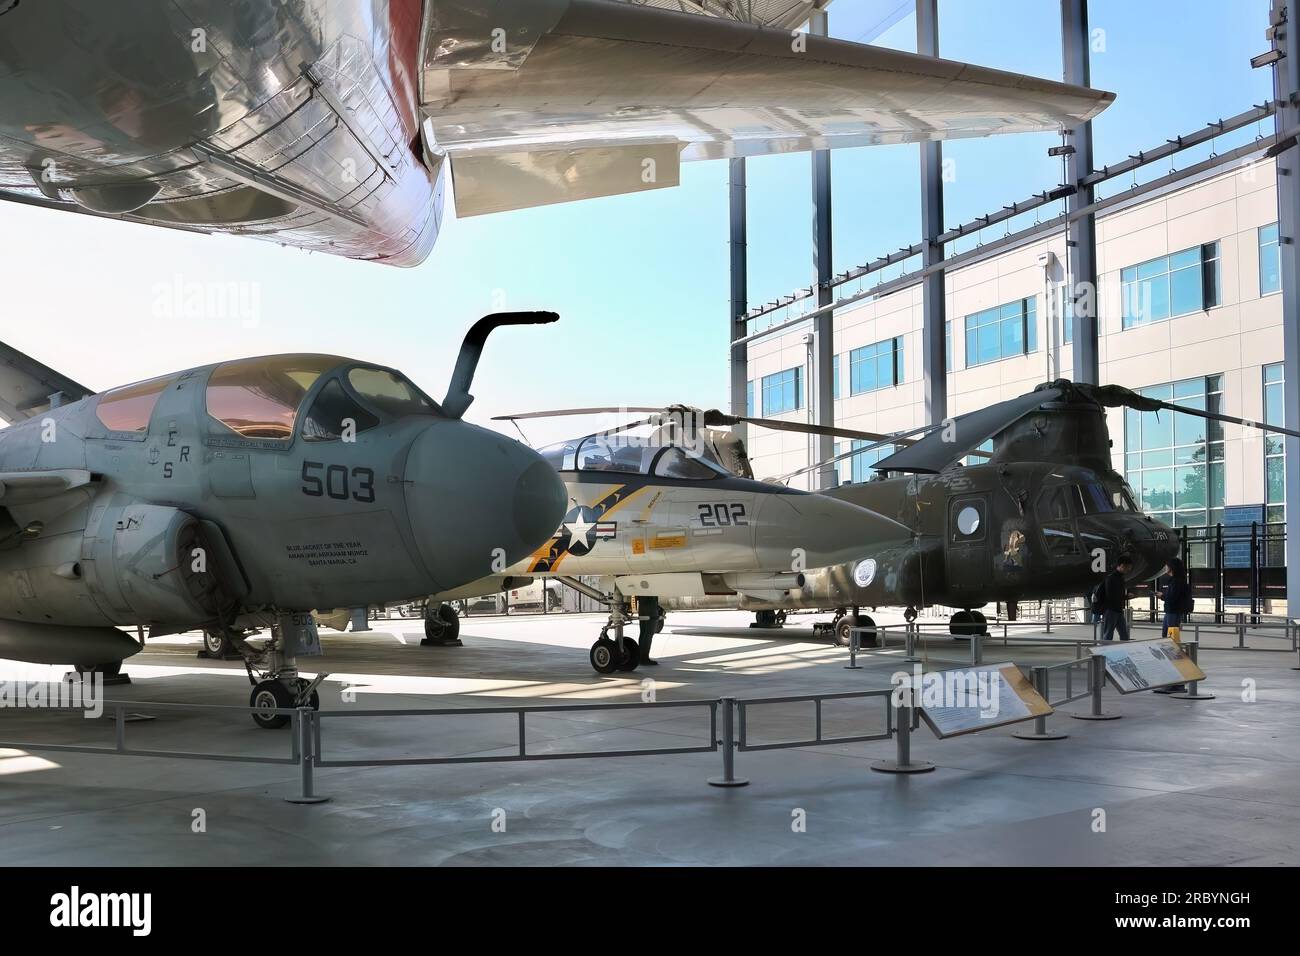 Grumman EA-6B Prowler Grumman F-14A Tomcat jet fighter and Boeing CH-47D Chinook 'My Old Lady' helicopter The Museum of Flight Seattle Washington USA Stock Photo